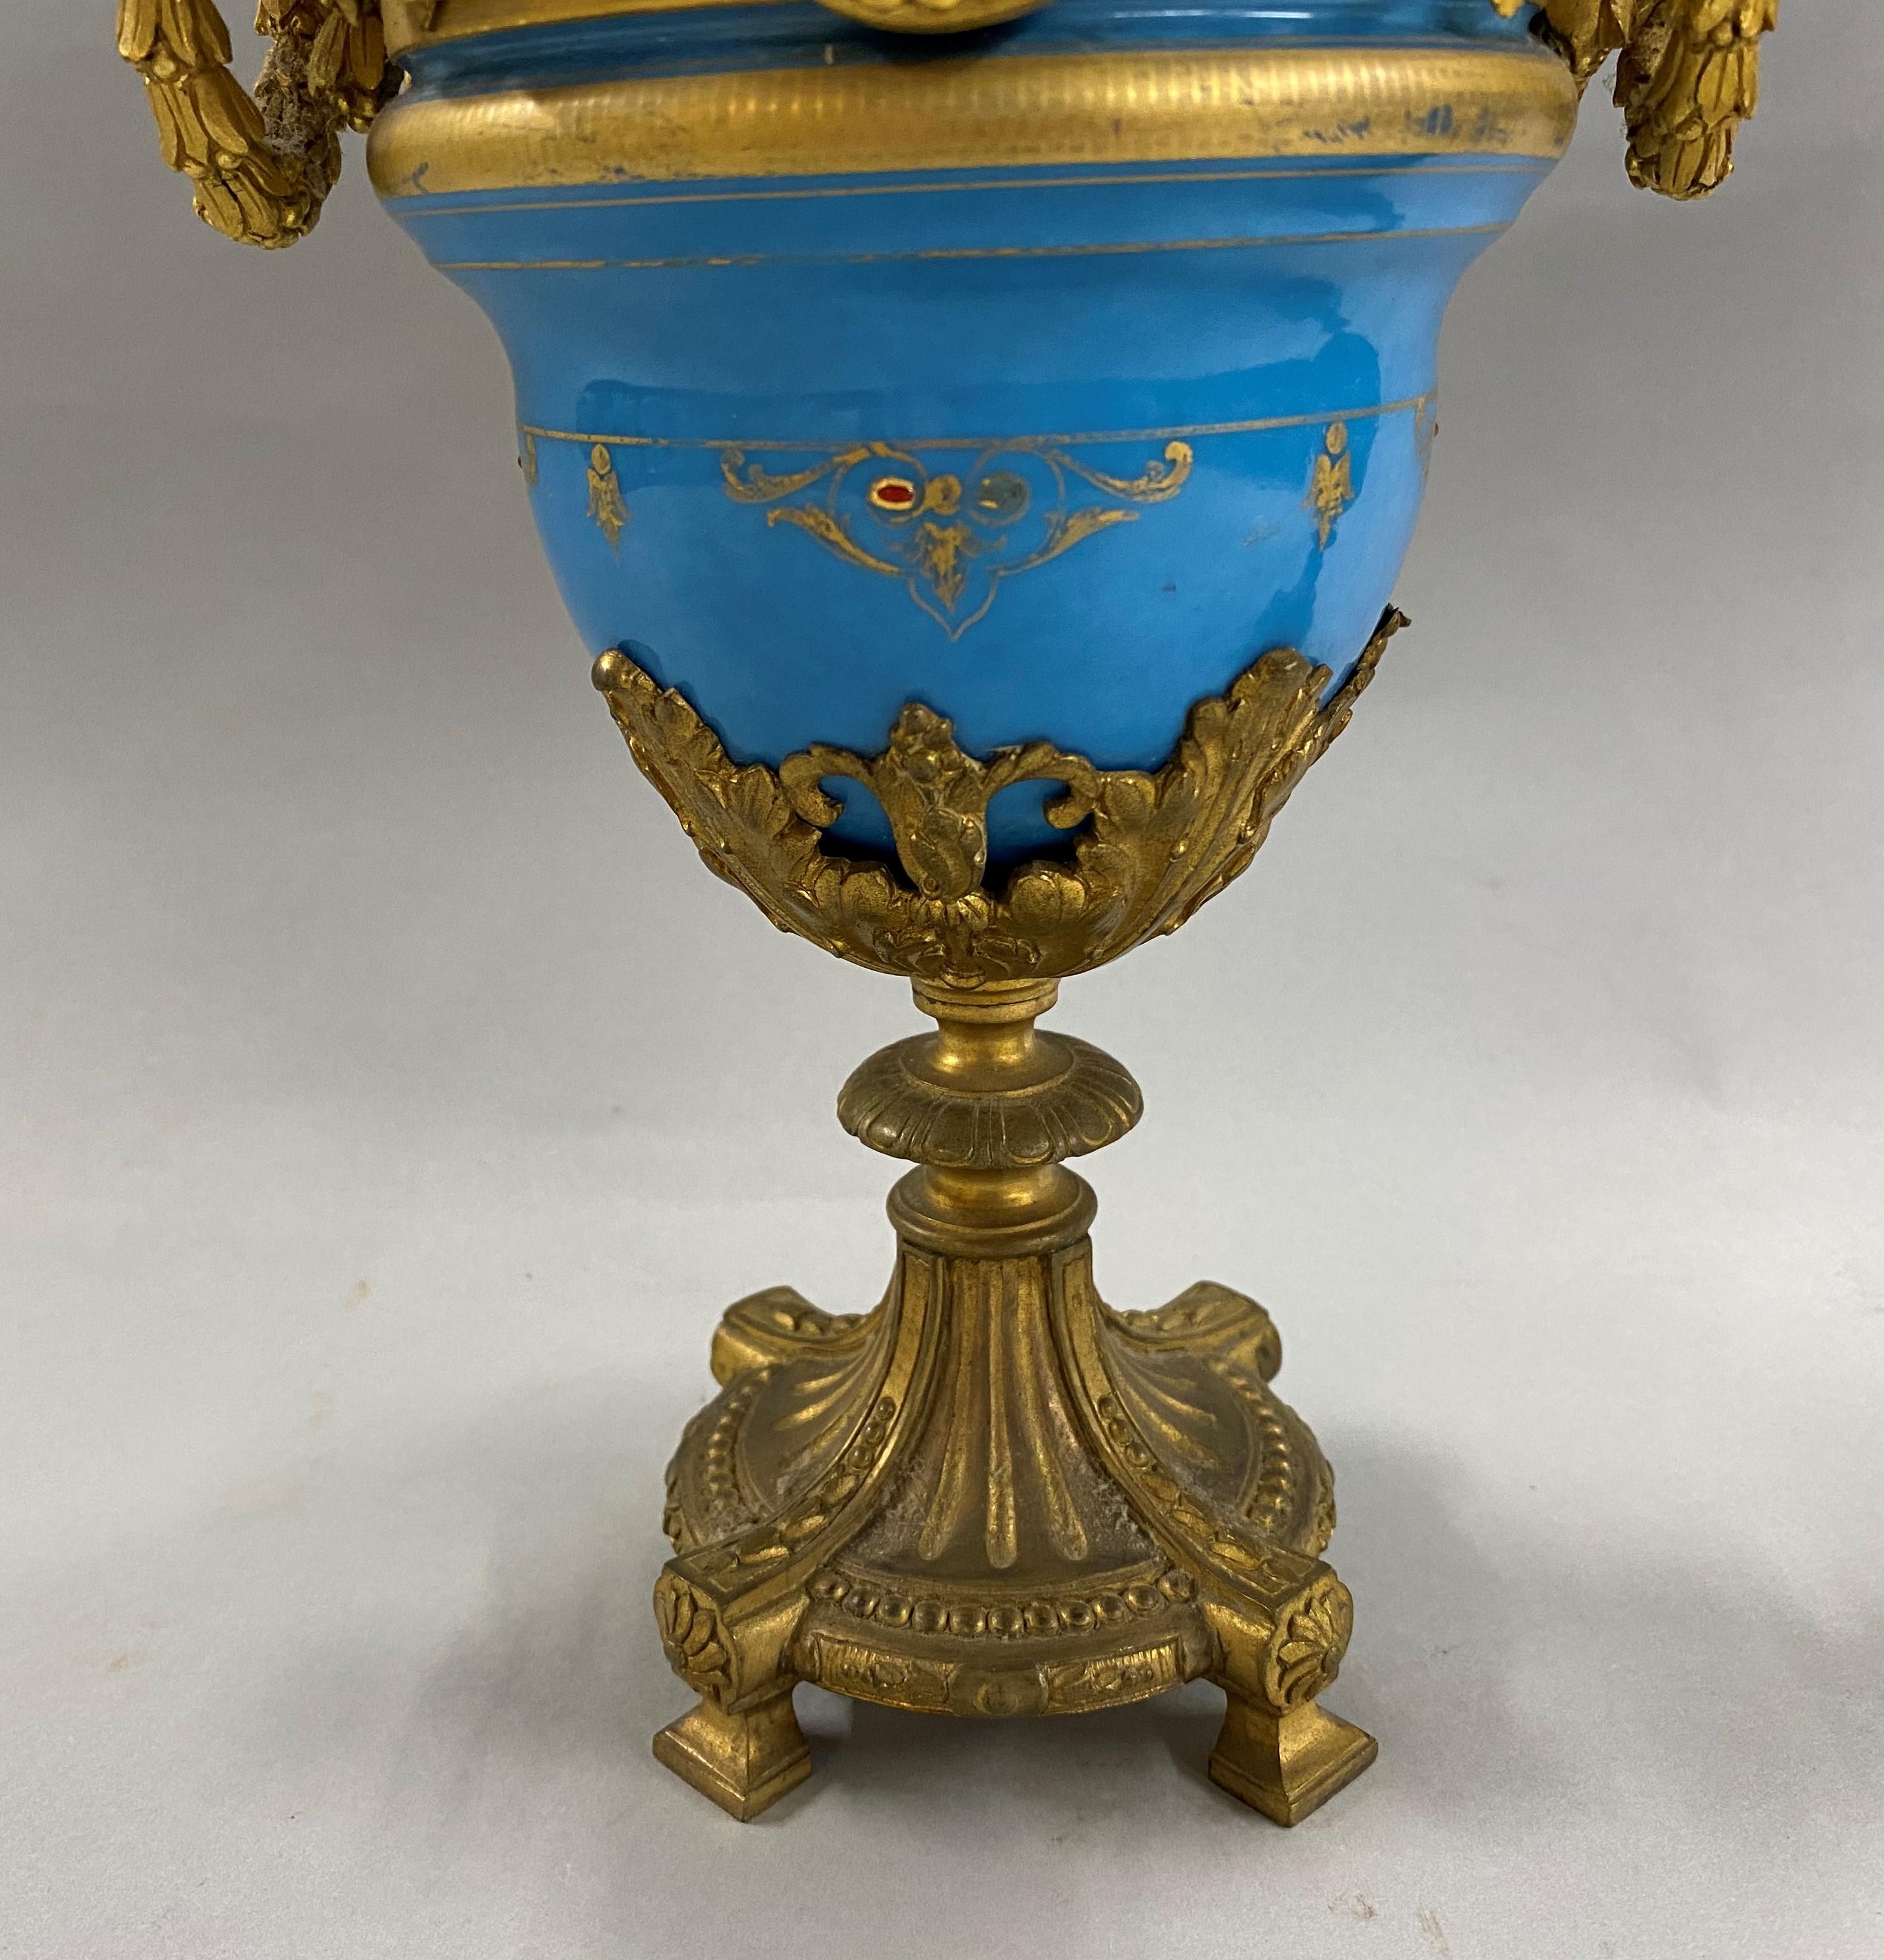 19th Century Pair of French Sevres Celeste Blue Porcelain Urns with Gilt Ormolu 1